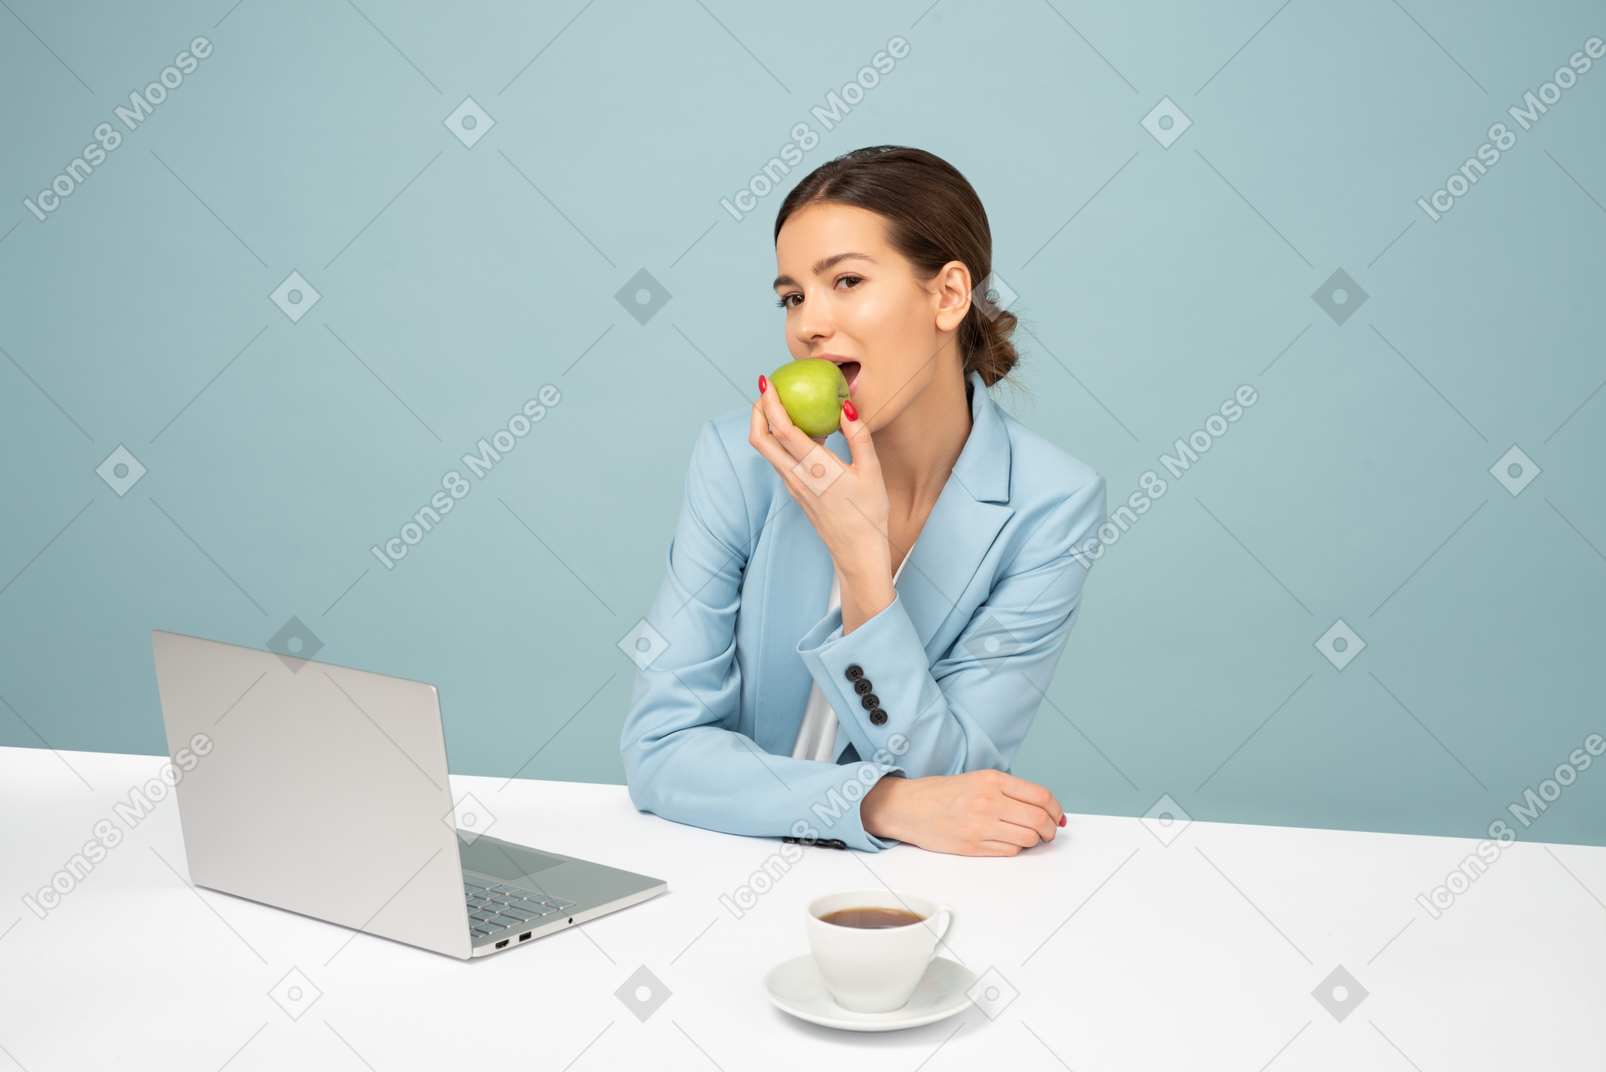 Attractive employee sitting at the table and eating an apple